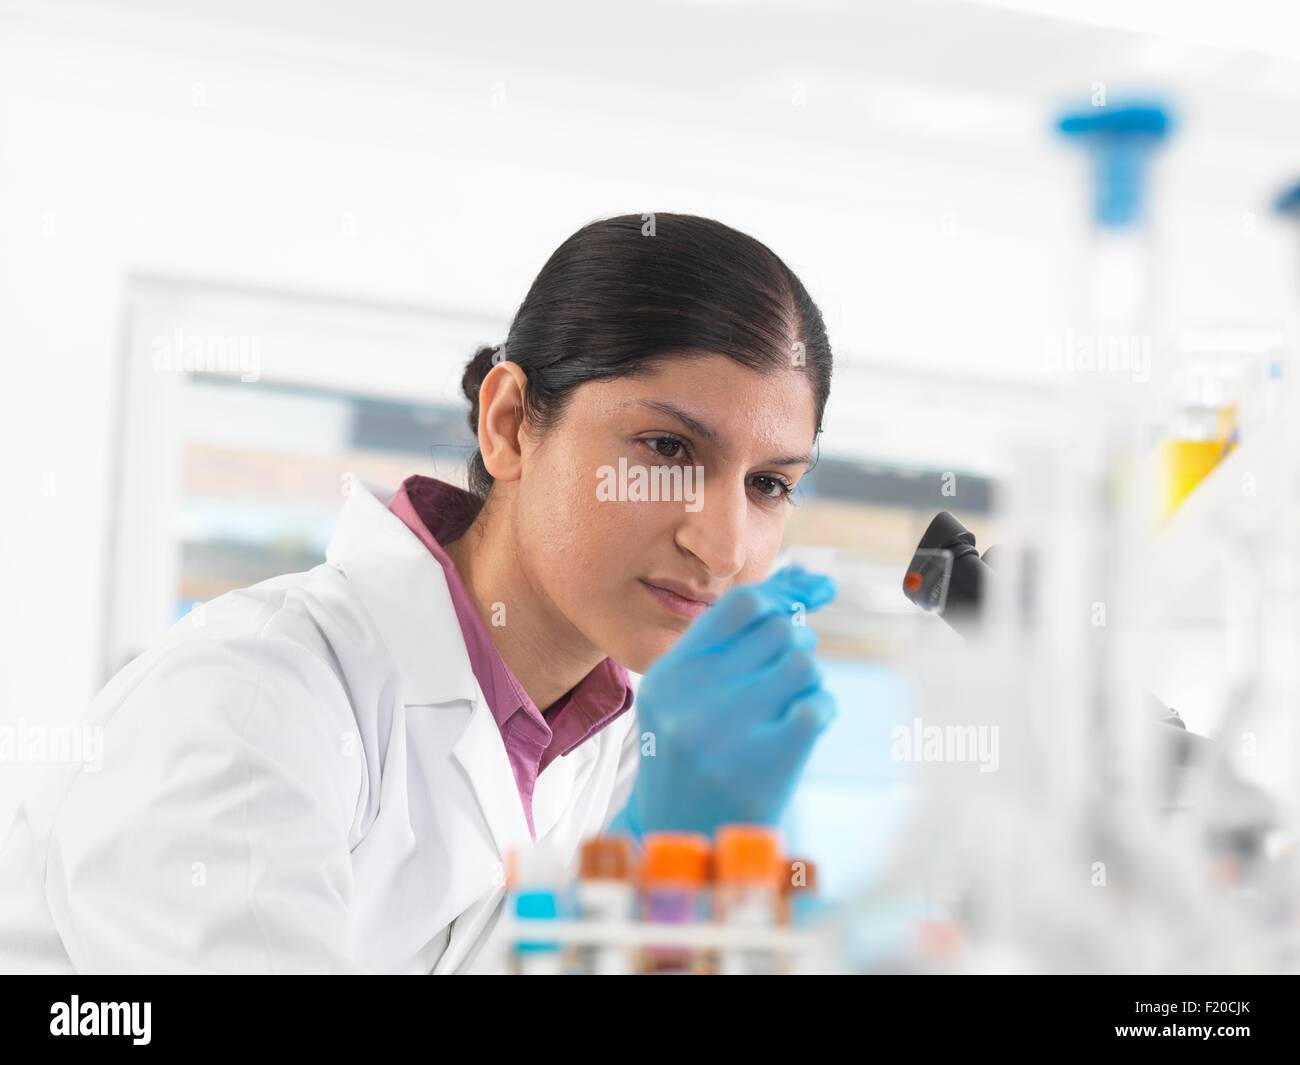 Young woman scientist viewing blood slide during clinical testing of medical samples in a laboratory Stock Photo